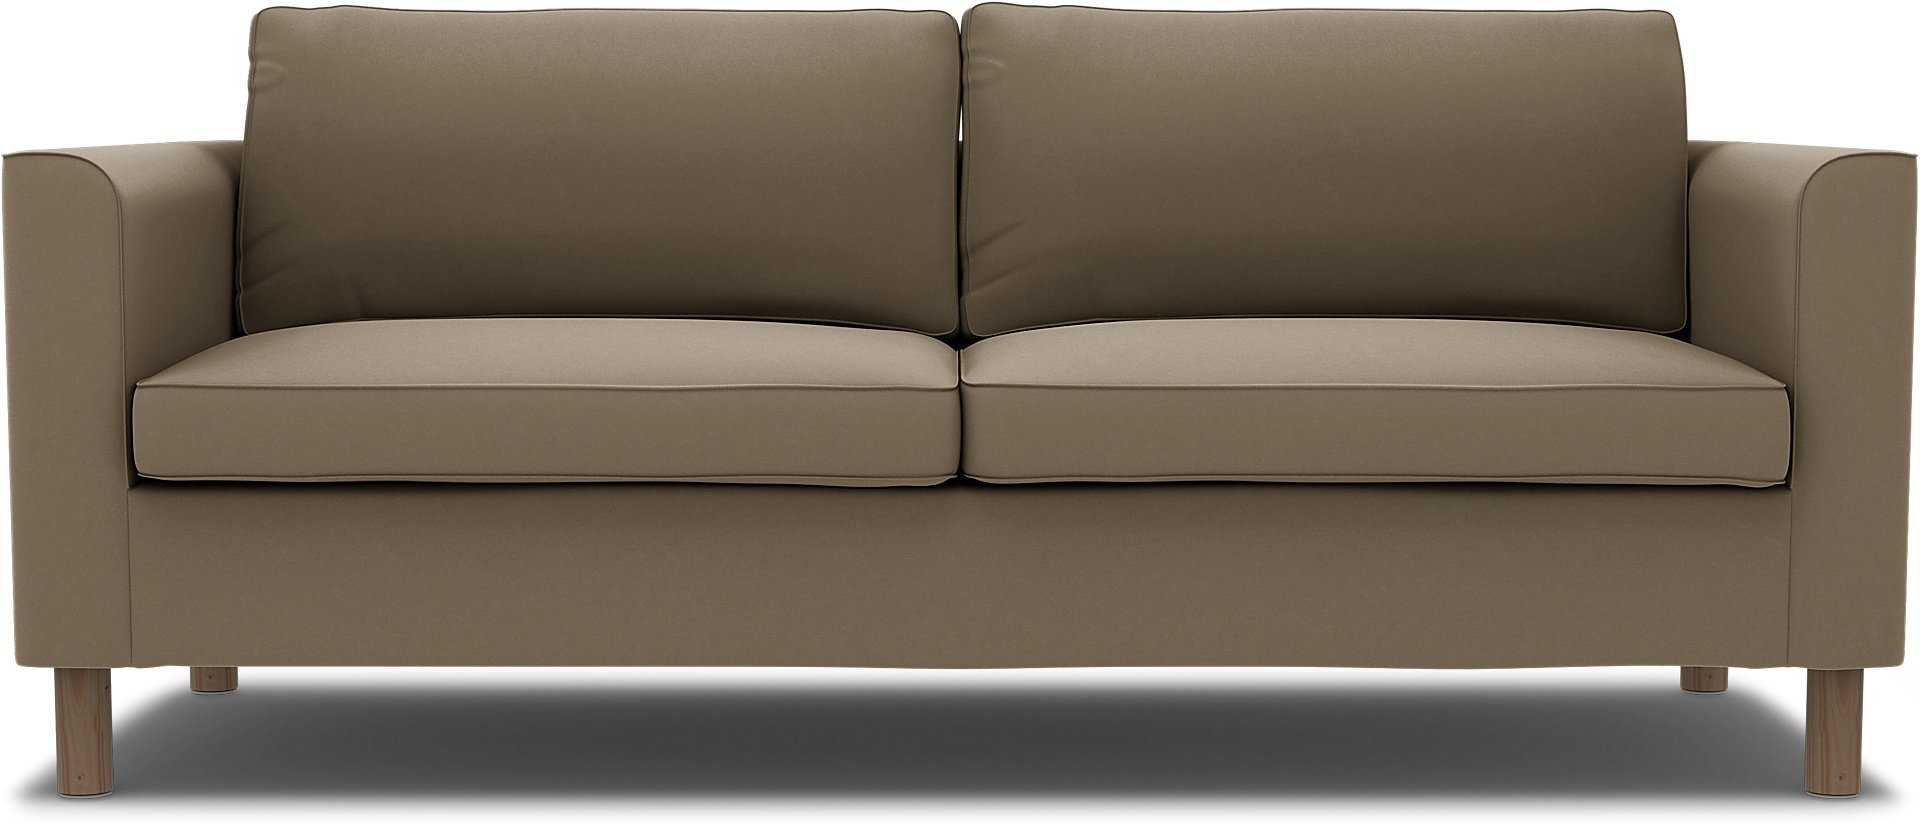 IKEA - Parup 3 Seater Cover, Taupe, Velvet - Bemz